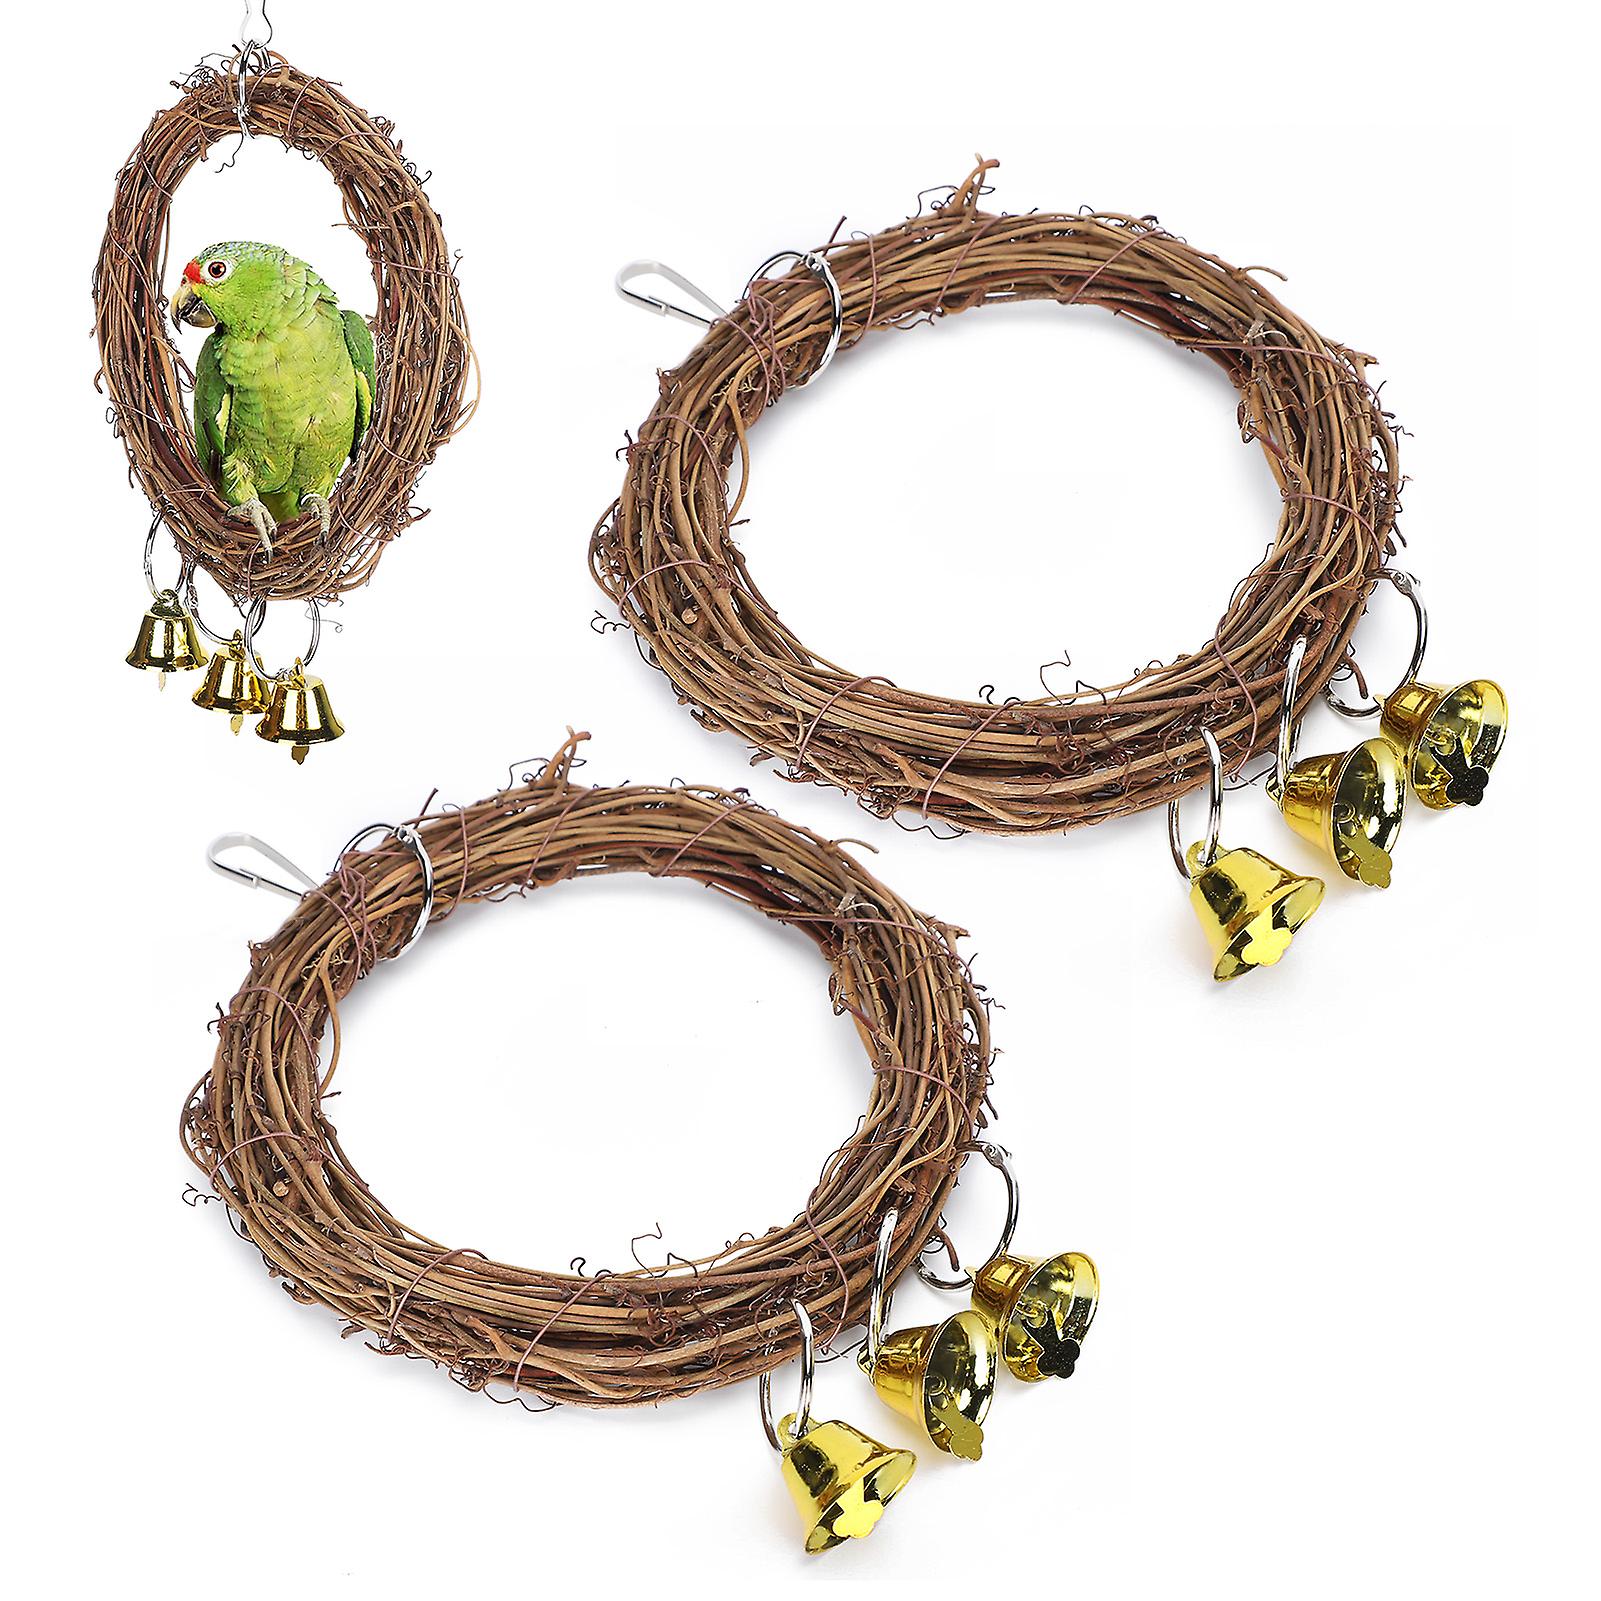 2pcs Parrots Swing With Bells Natural Rattan Hanging Chewing Biting Toys Birds Supplies